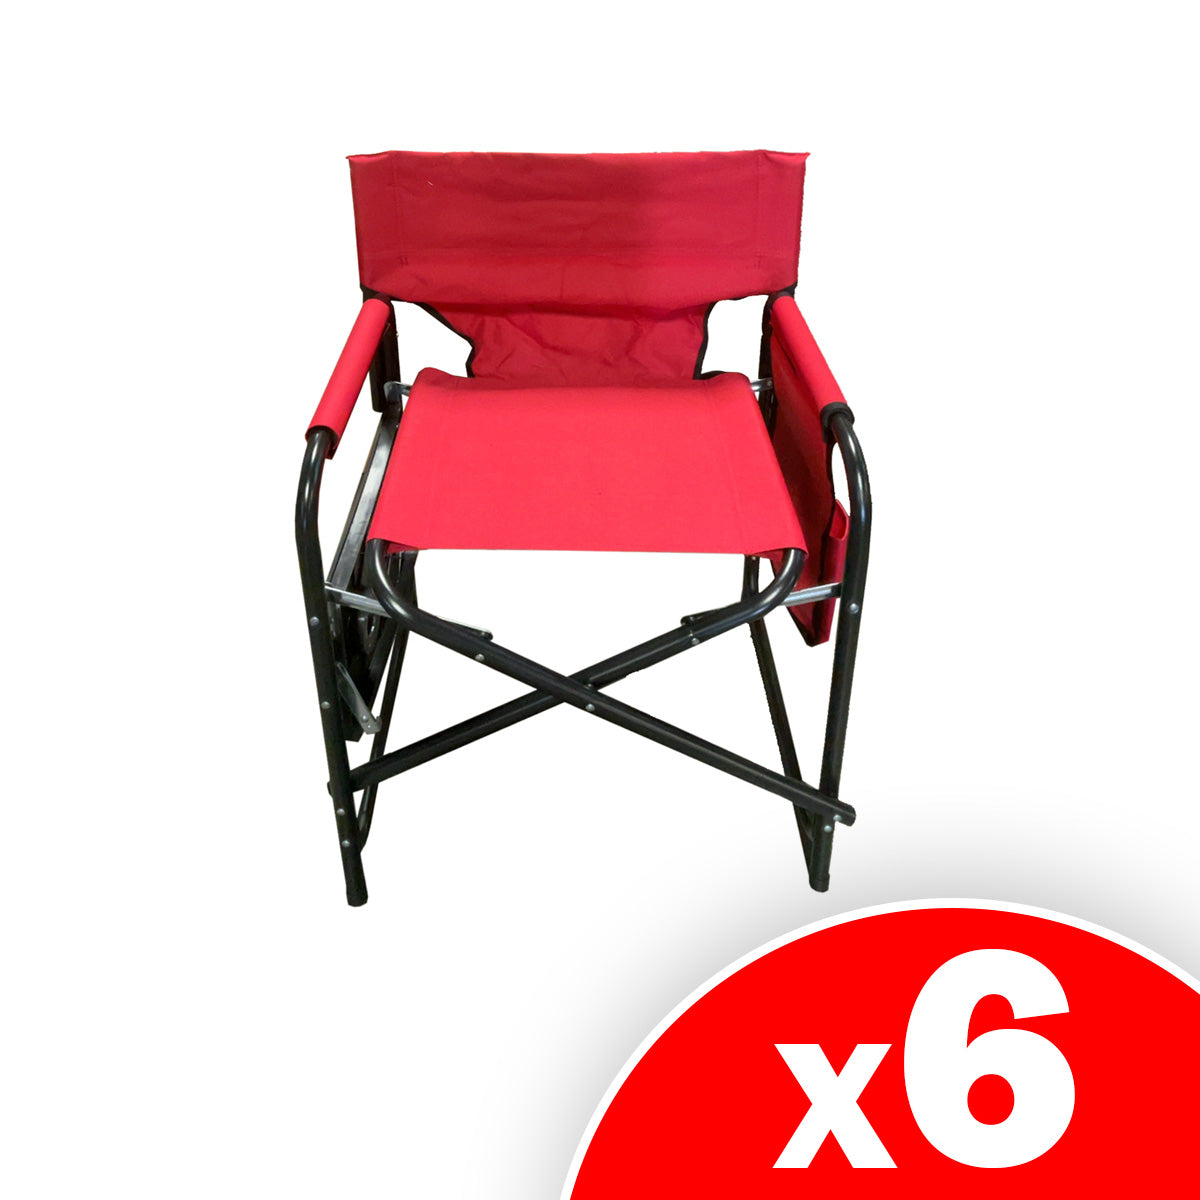 Folding Directors Chair Outdoor Camping Chair with Side Table & Pockets, Red, 6 Pack